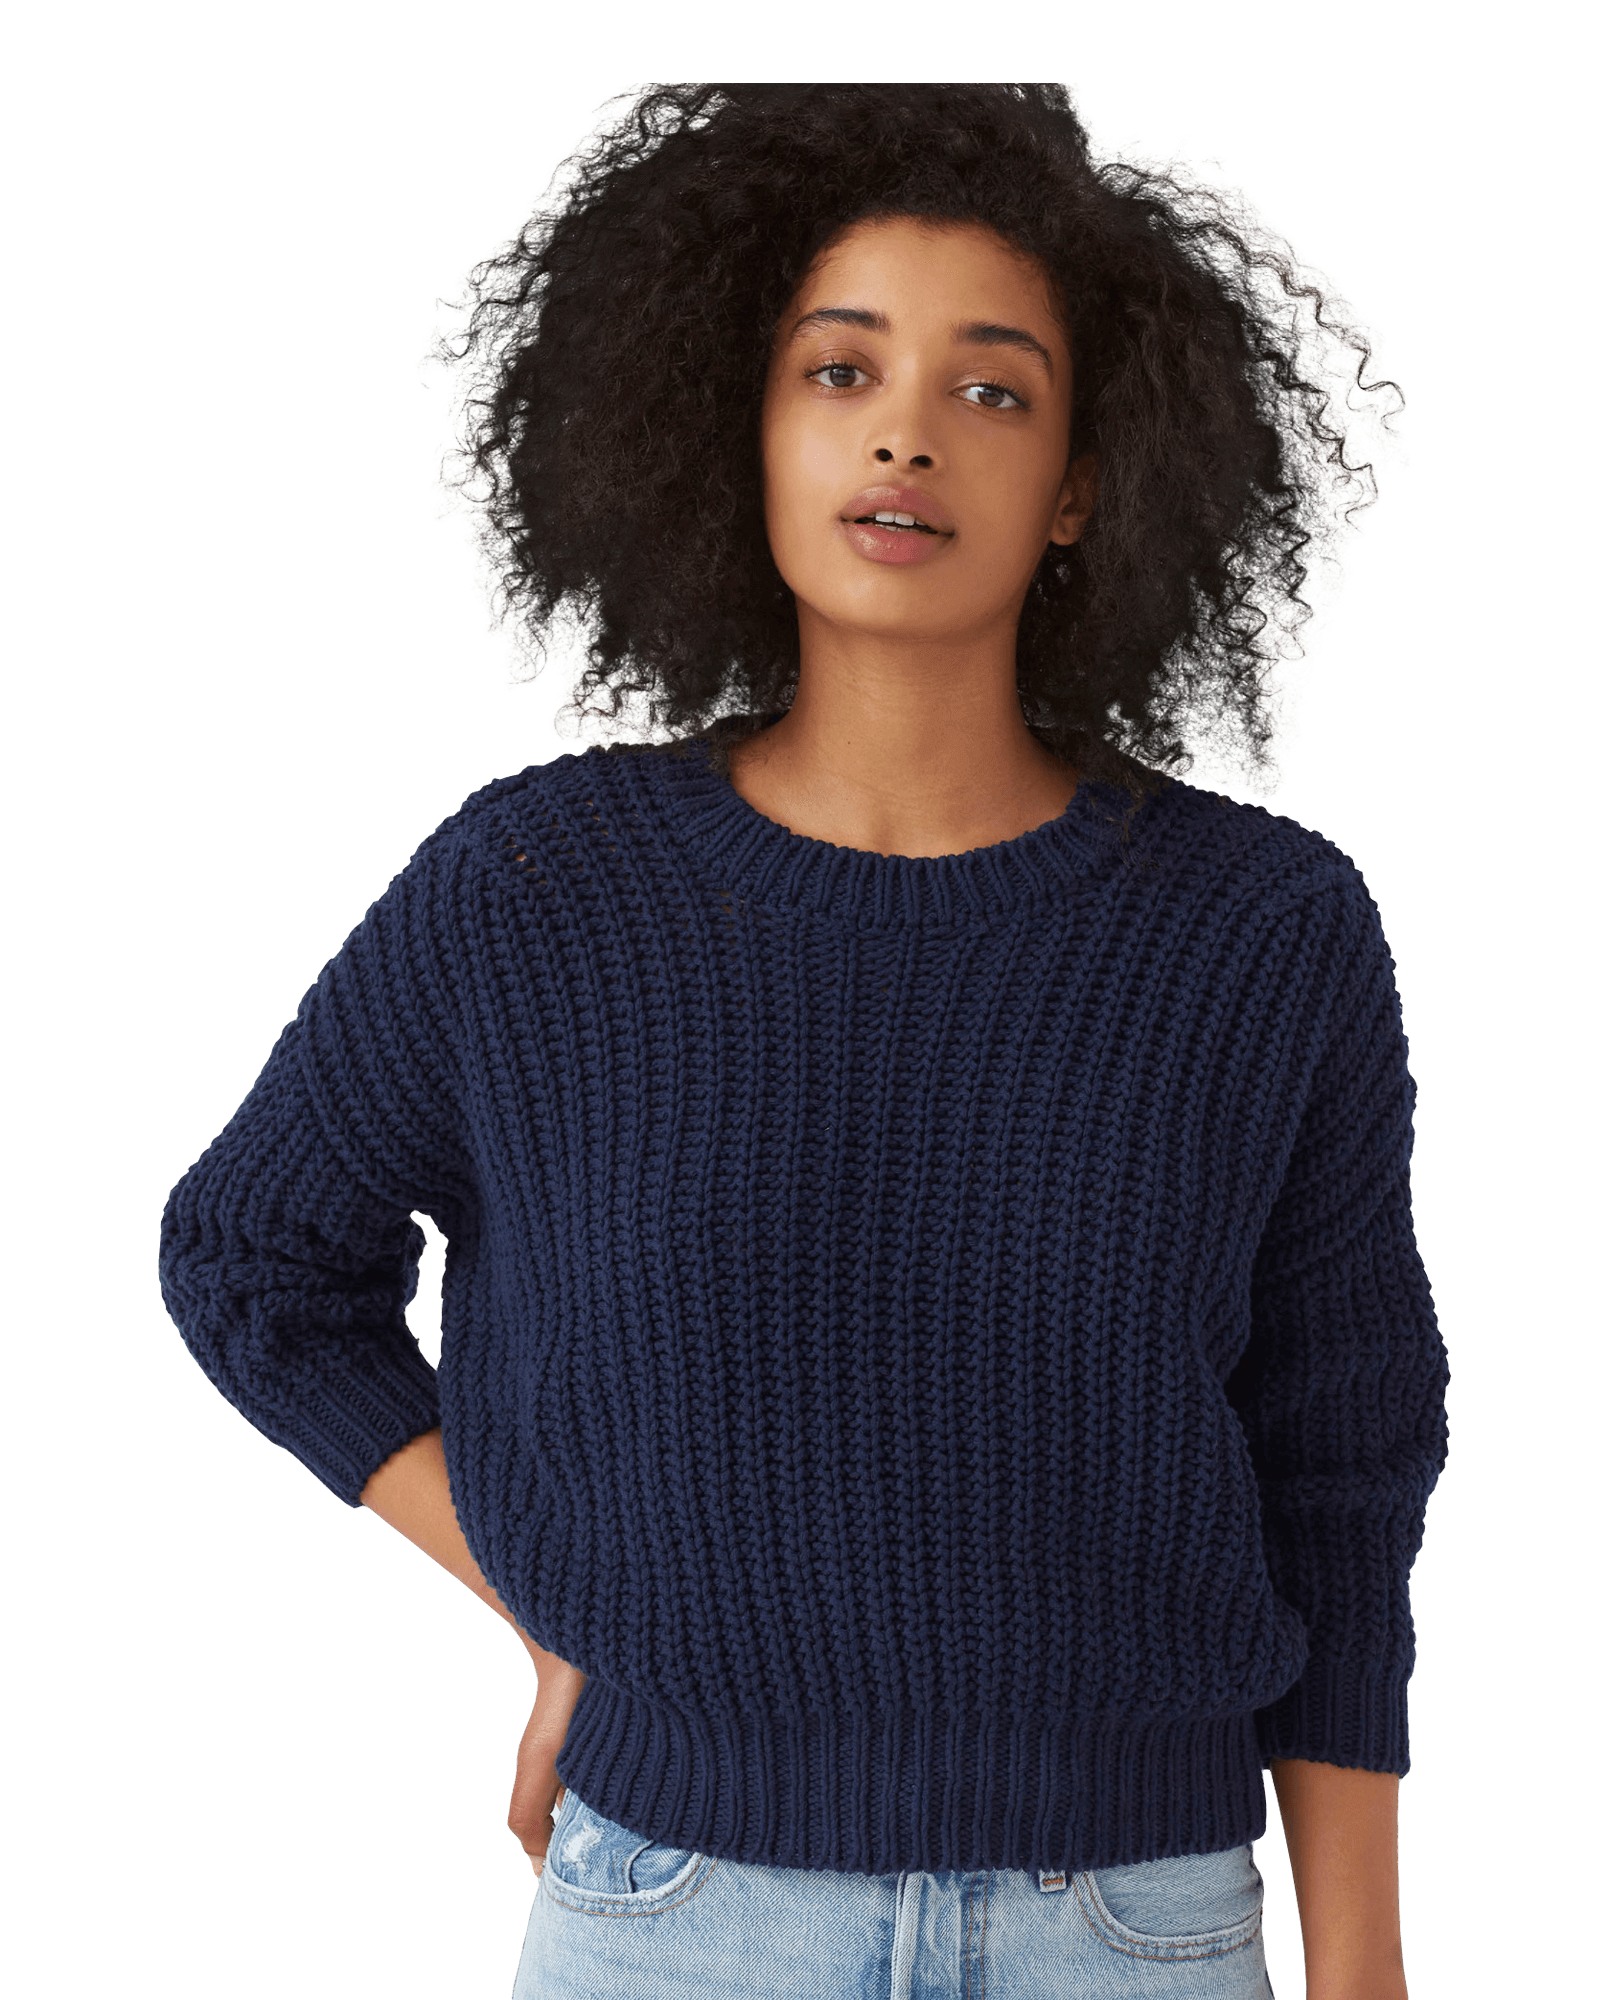 Jumper Woman PNG Transparent Free Hd Image Download - UP Valy